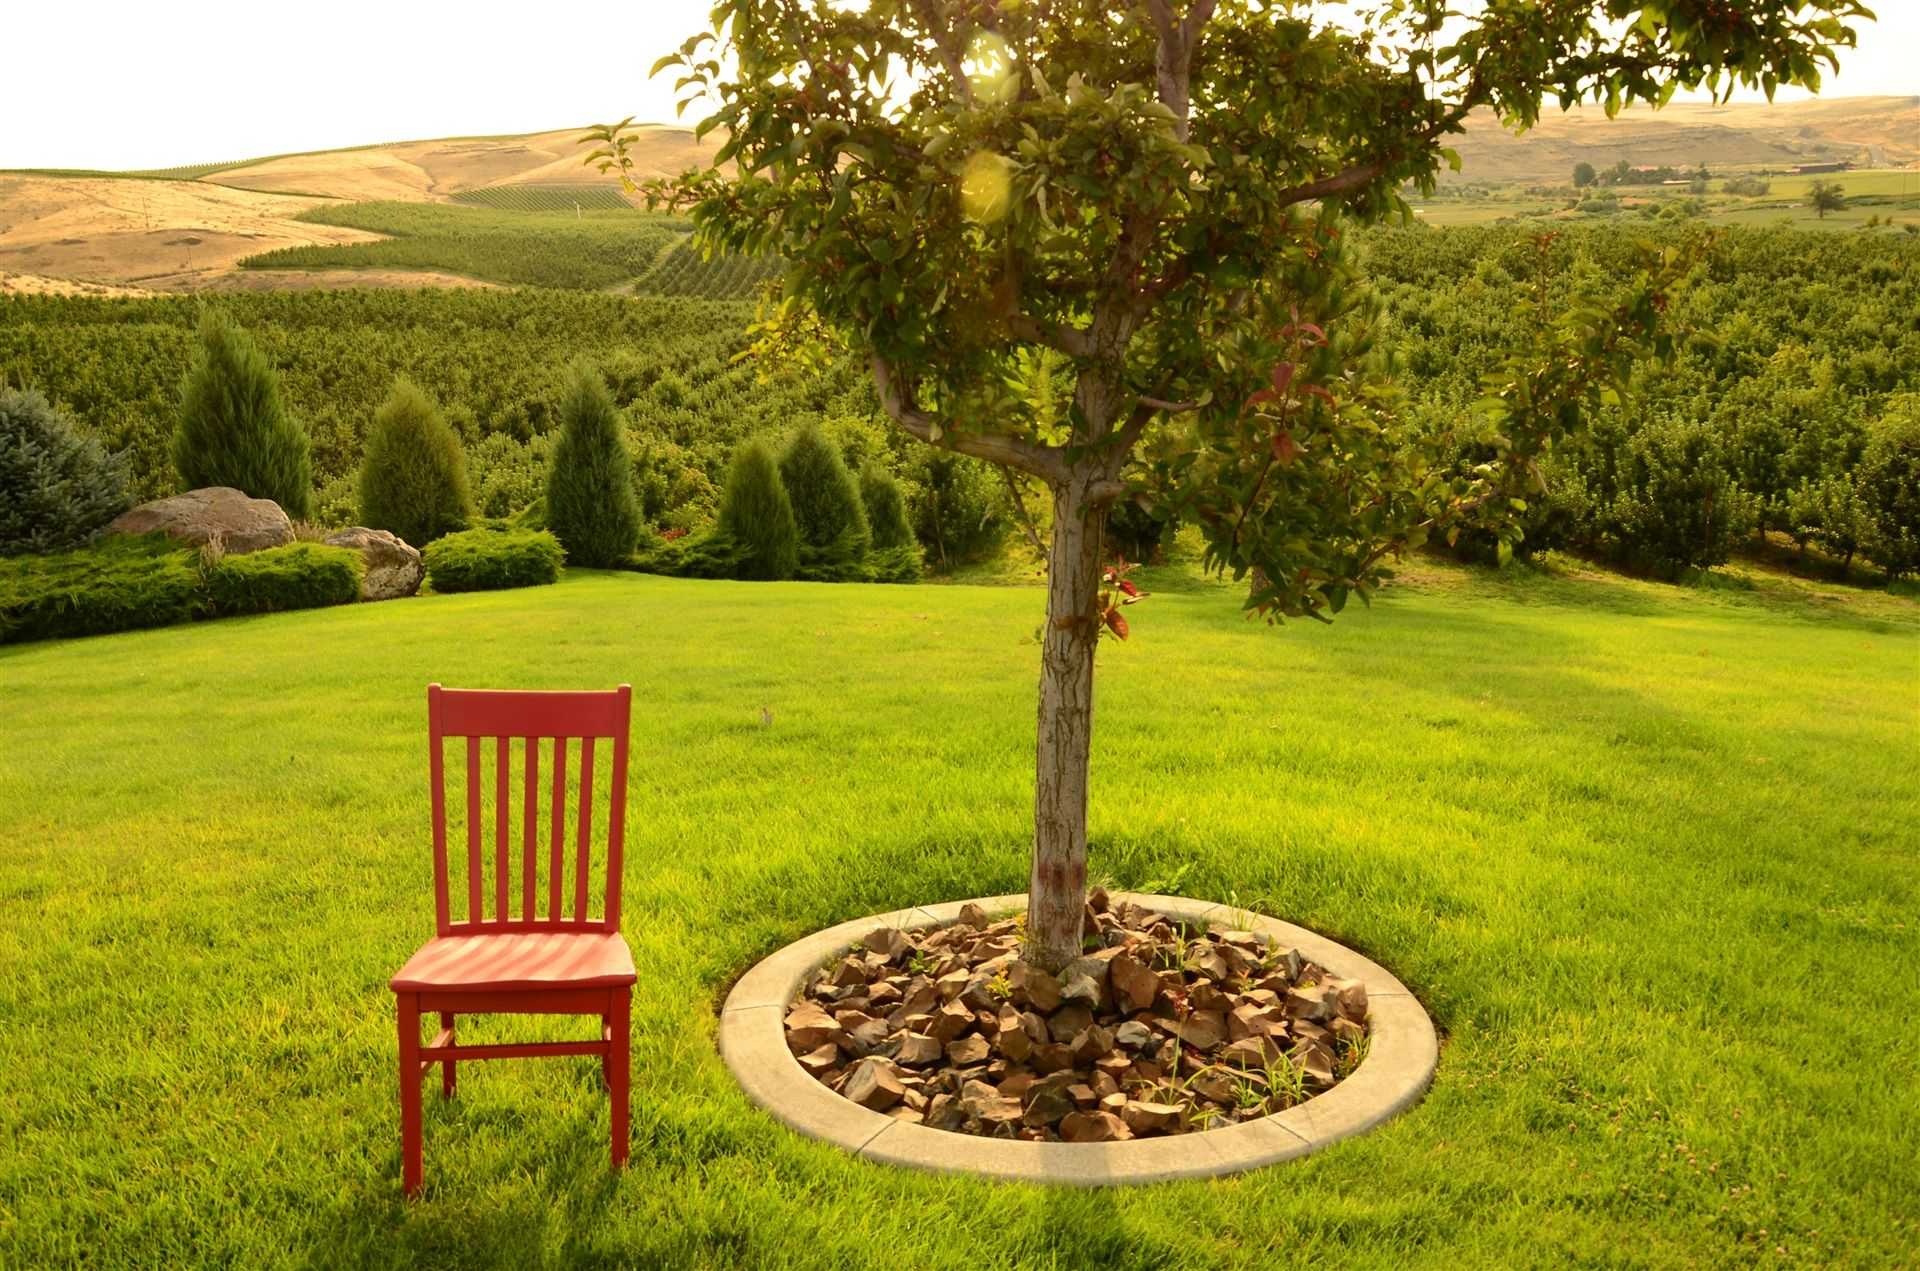 Red chair sitting on a well-manicured lawn next to a planted tree with a stonework ring a ways away from the current trunk; forested area and mountainous hills in the background